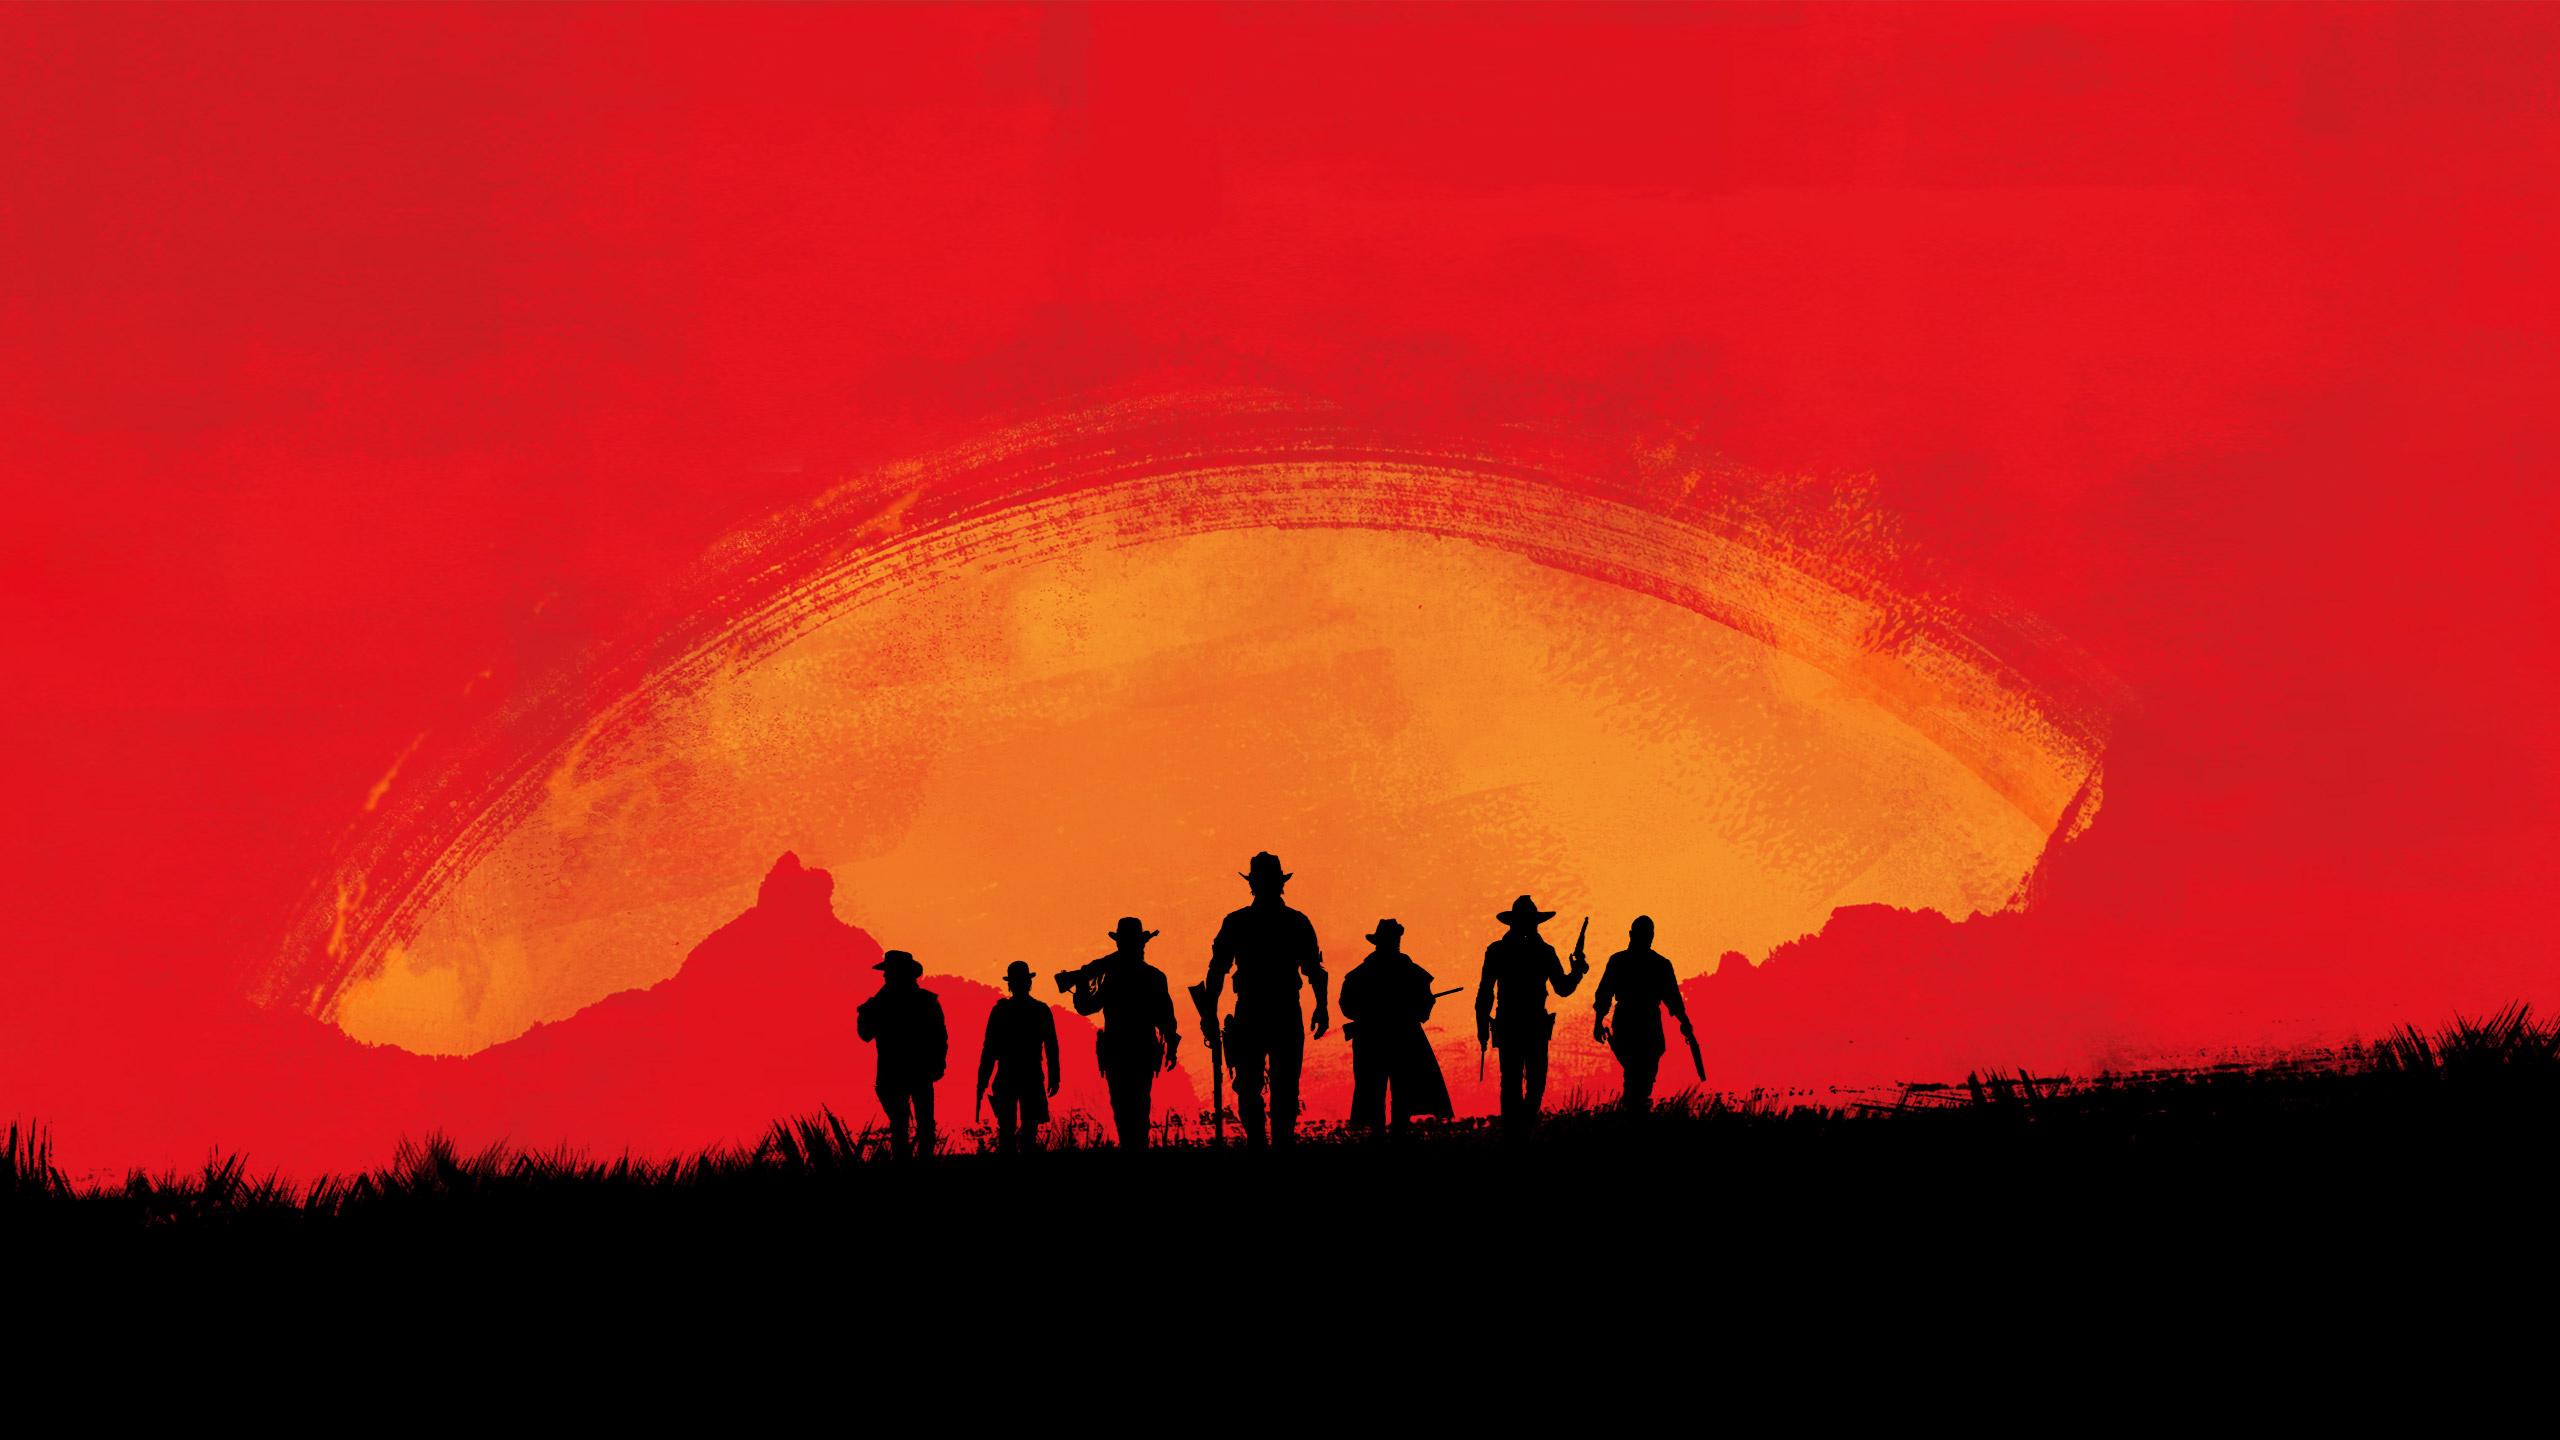 2560 x 1440 · jpeg - Red Dead Redemption 2 HD Wallpaper | Background Image | 2560x1440 | ID ...